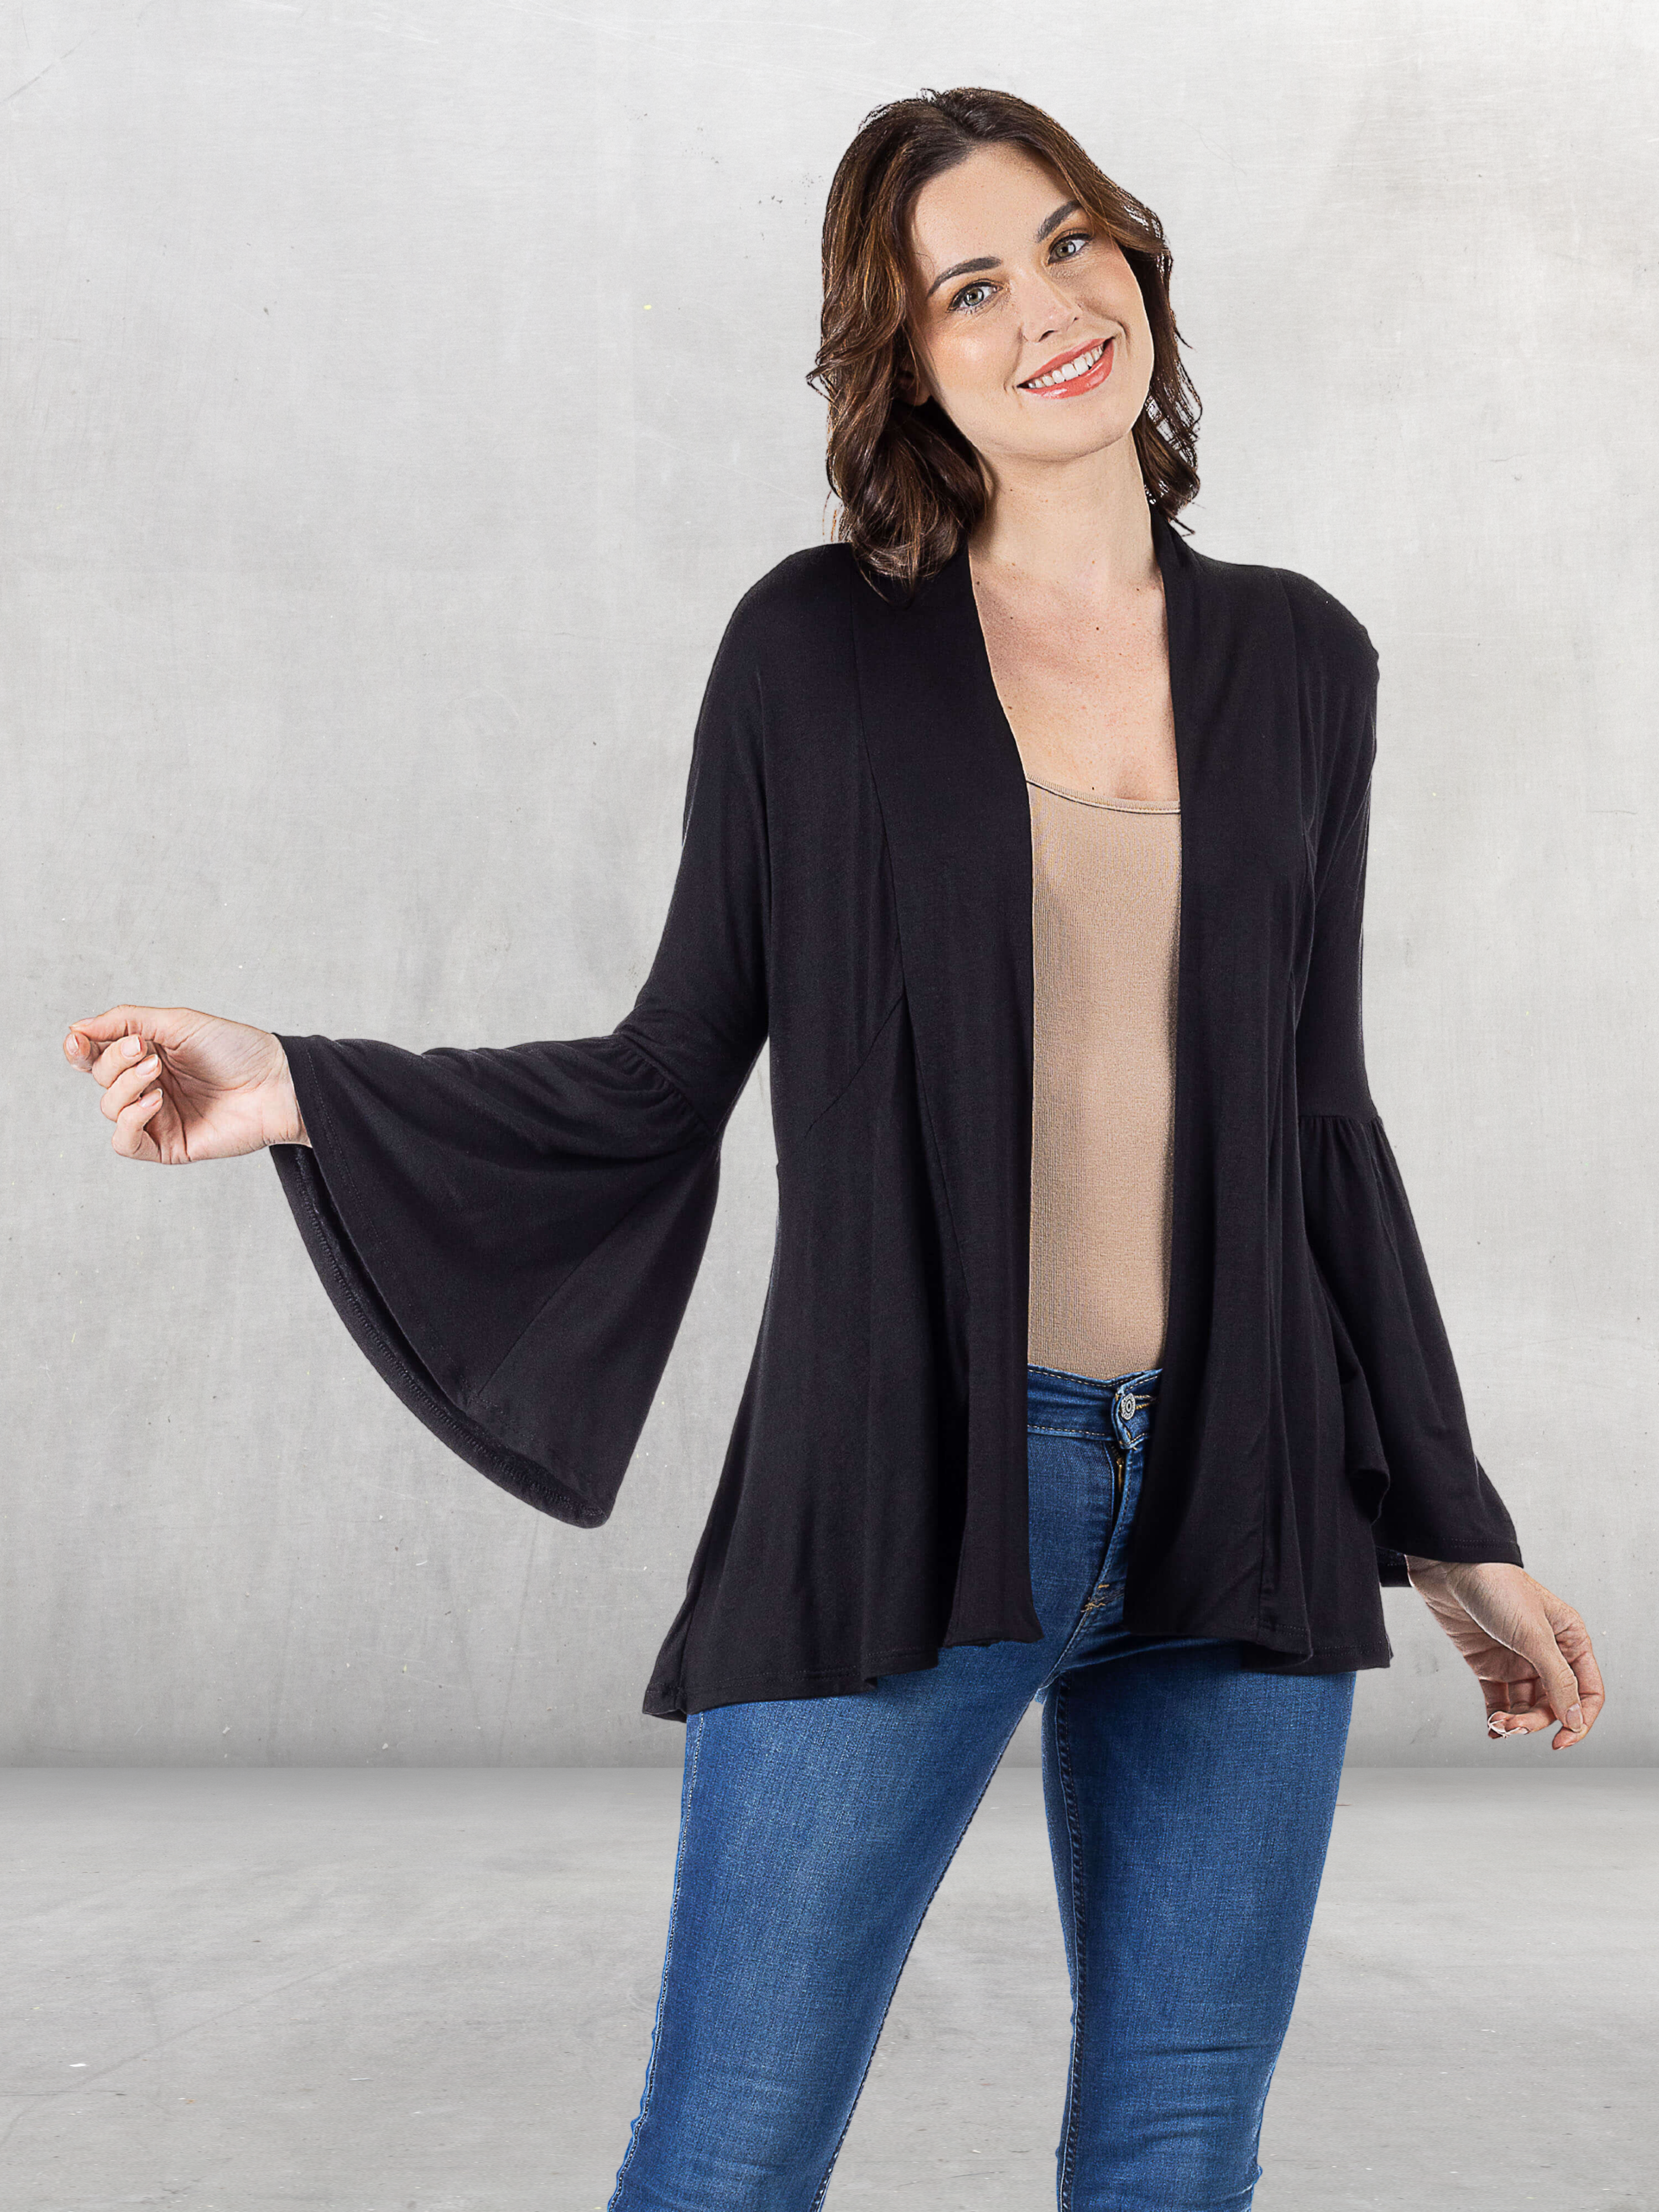 Bell Sleeve Flared Open Front Cardigan Black / L